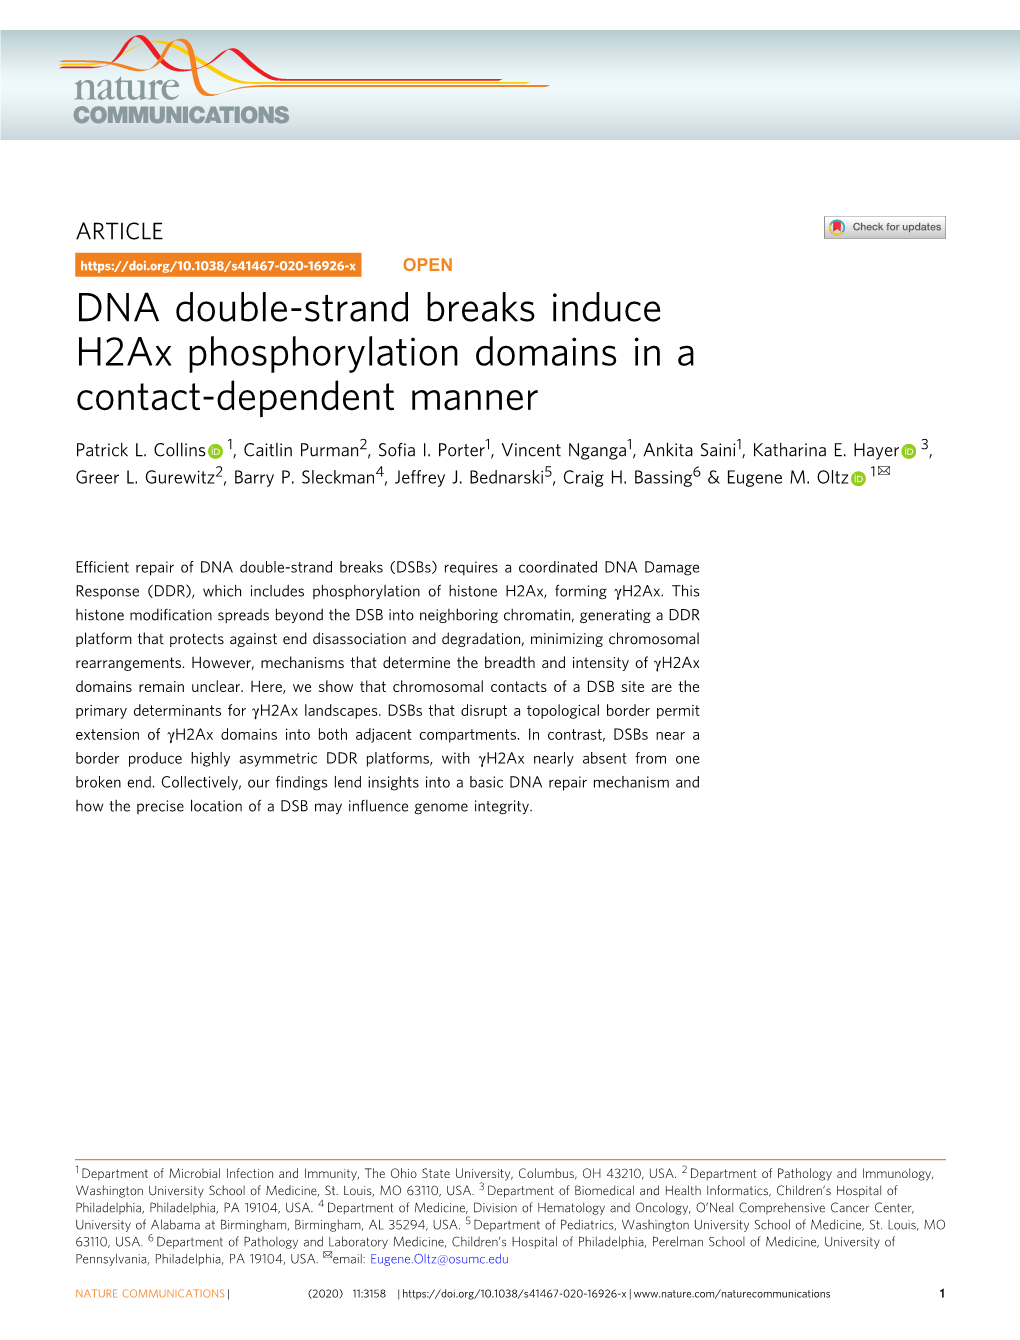 DNA Double-Strand Breaks Induce H2ax Phosphorylation Domains in a Contact-Dependent Manner